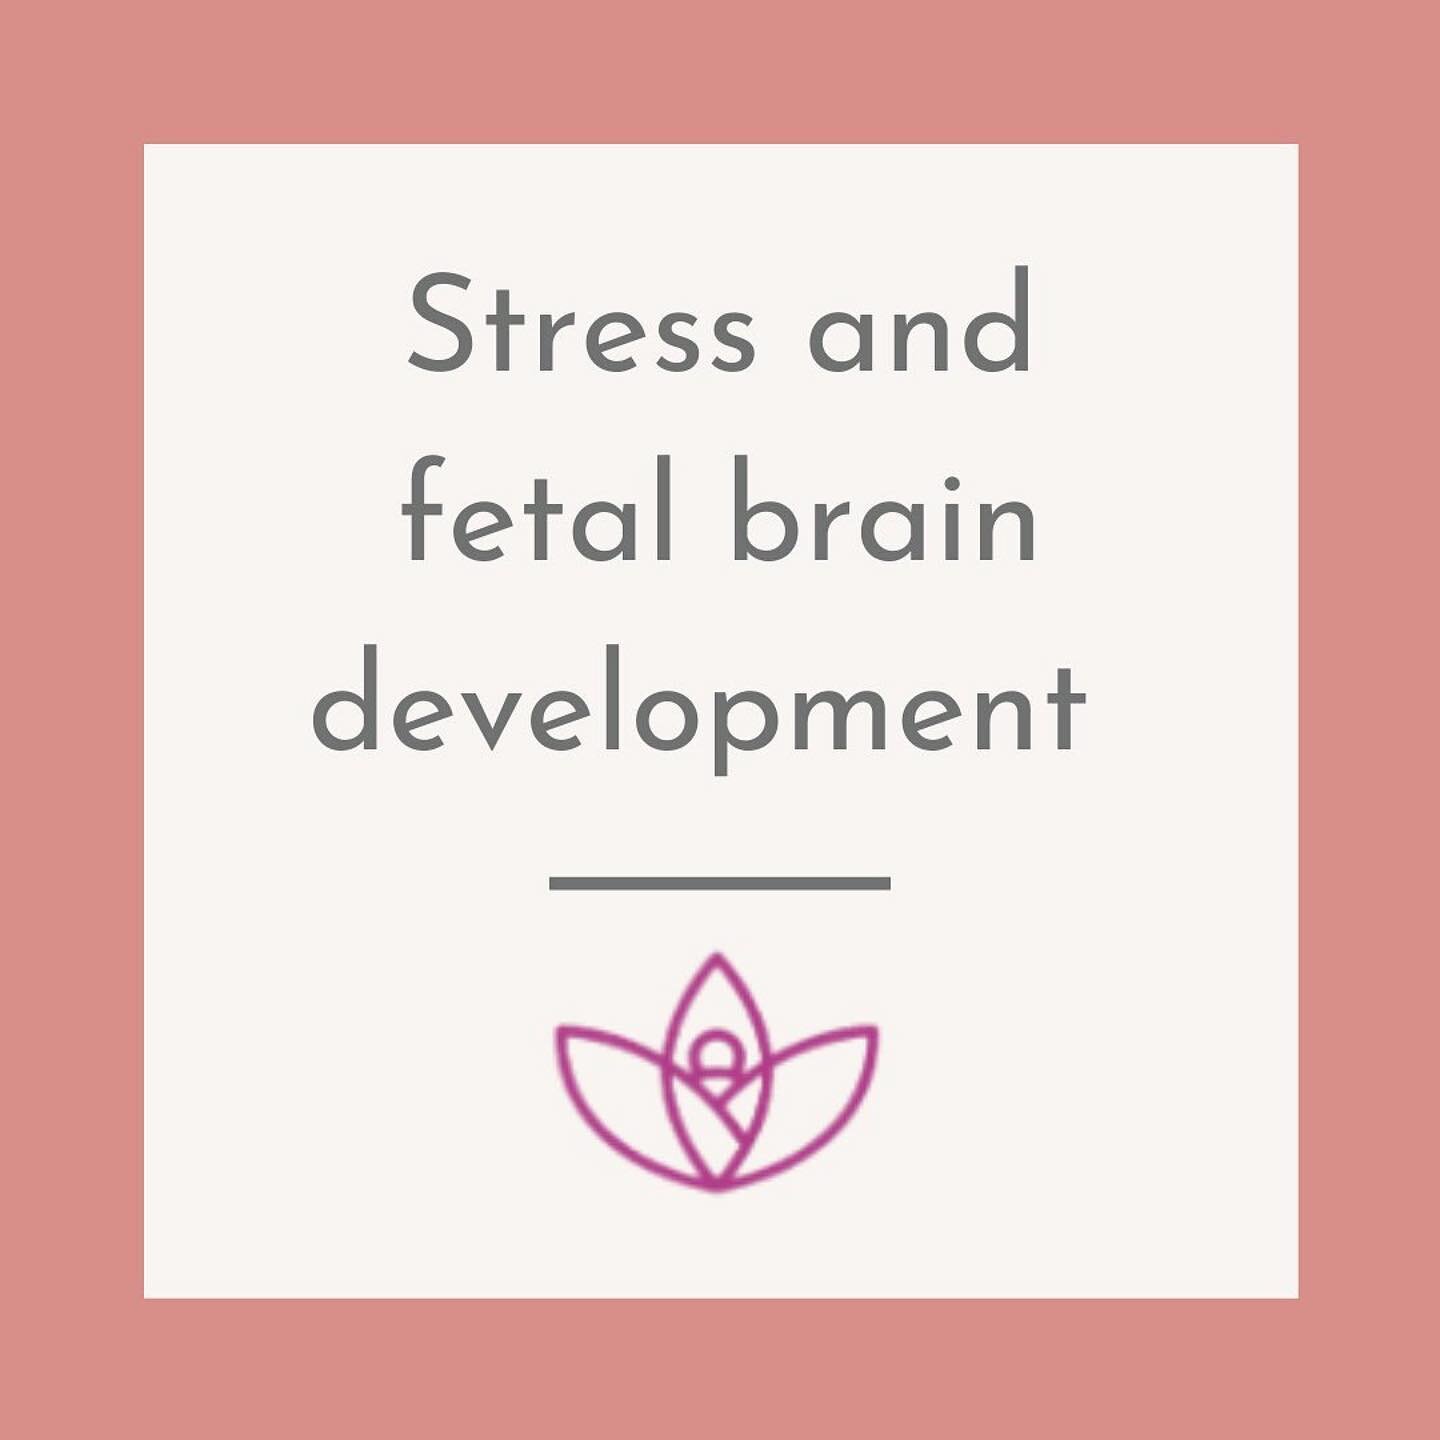 How-to give your baby a head start with stronger and healthier DNA✨

Did you know that you can set your baby up for success while they are still developing?

There is a vastly growing field of fetal development and fetal psychology: The in-utero envi